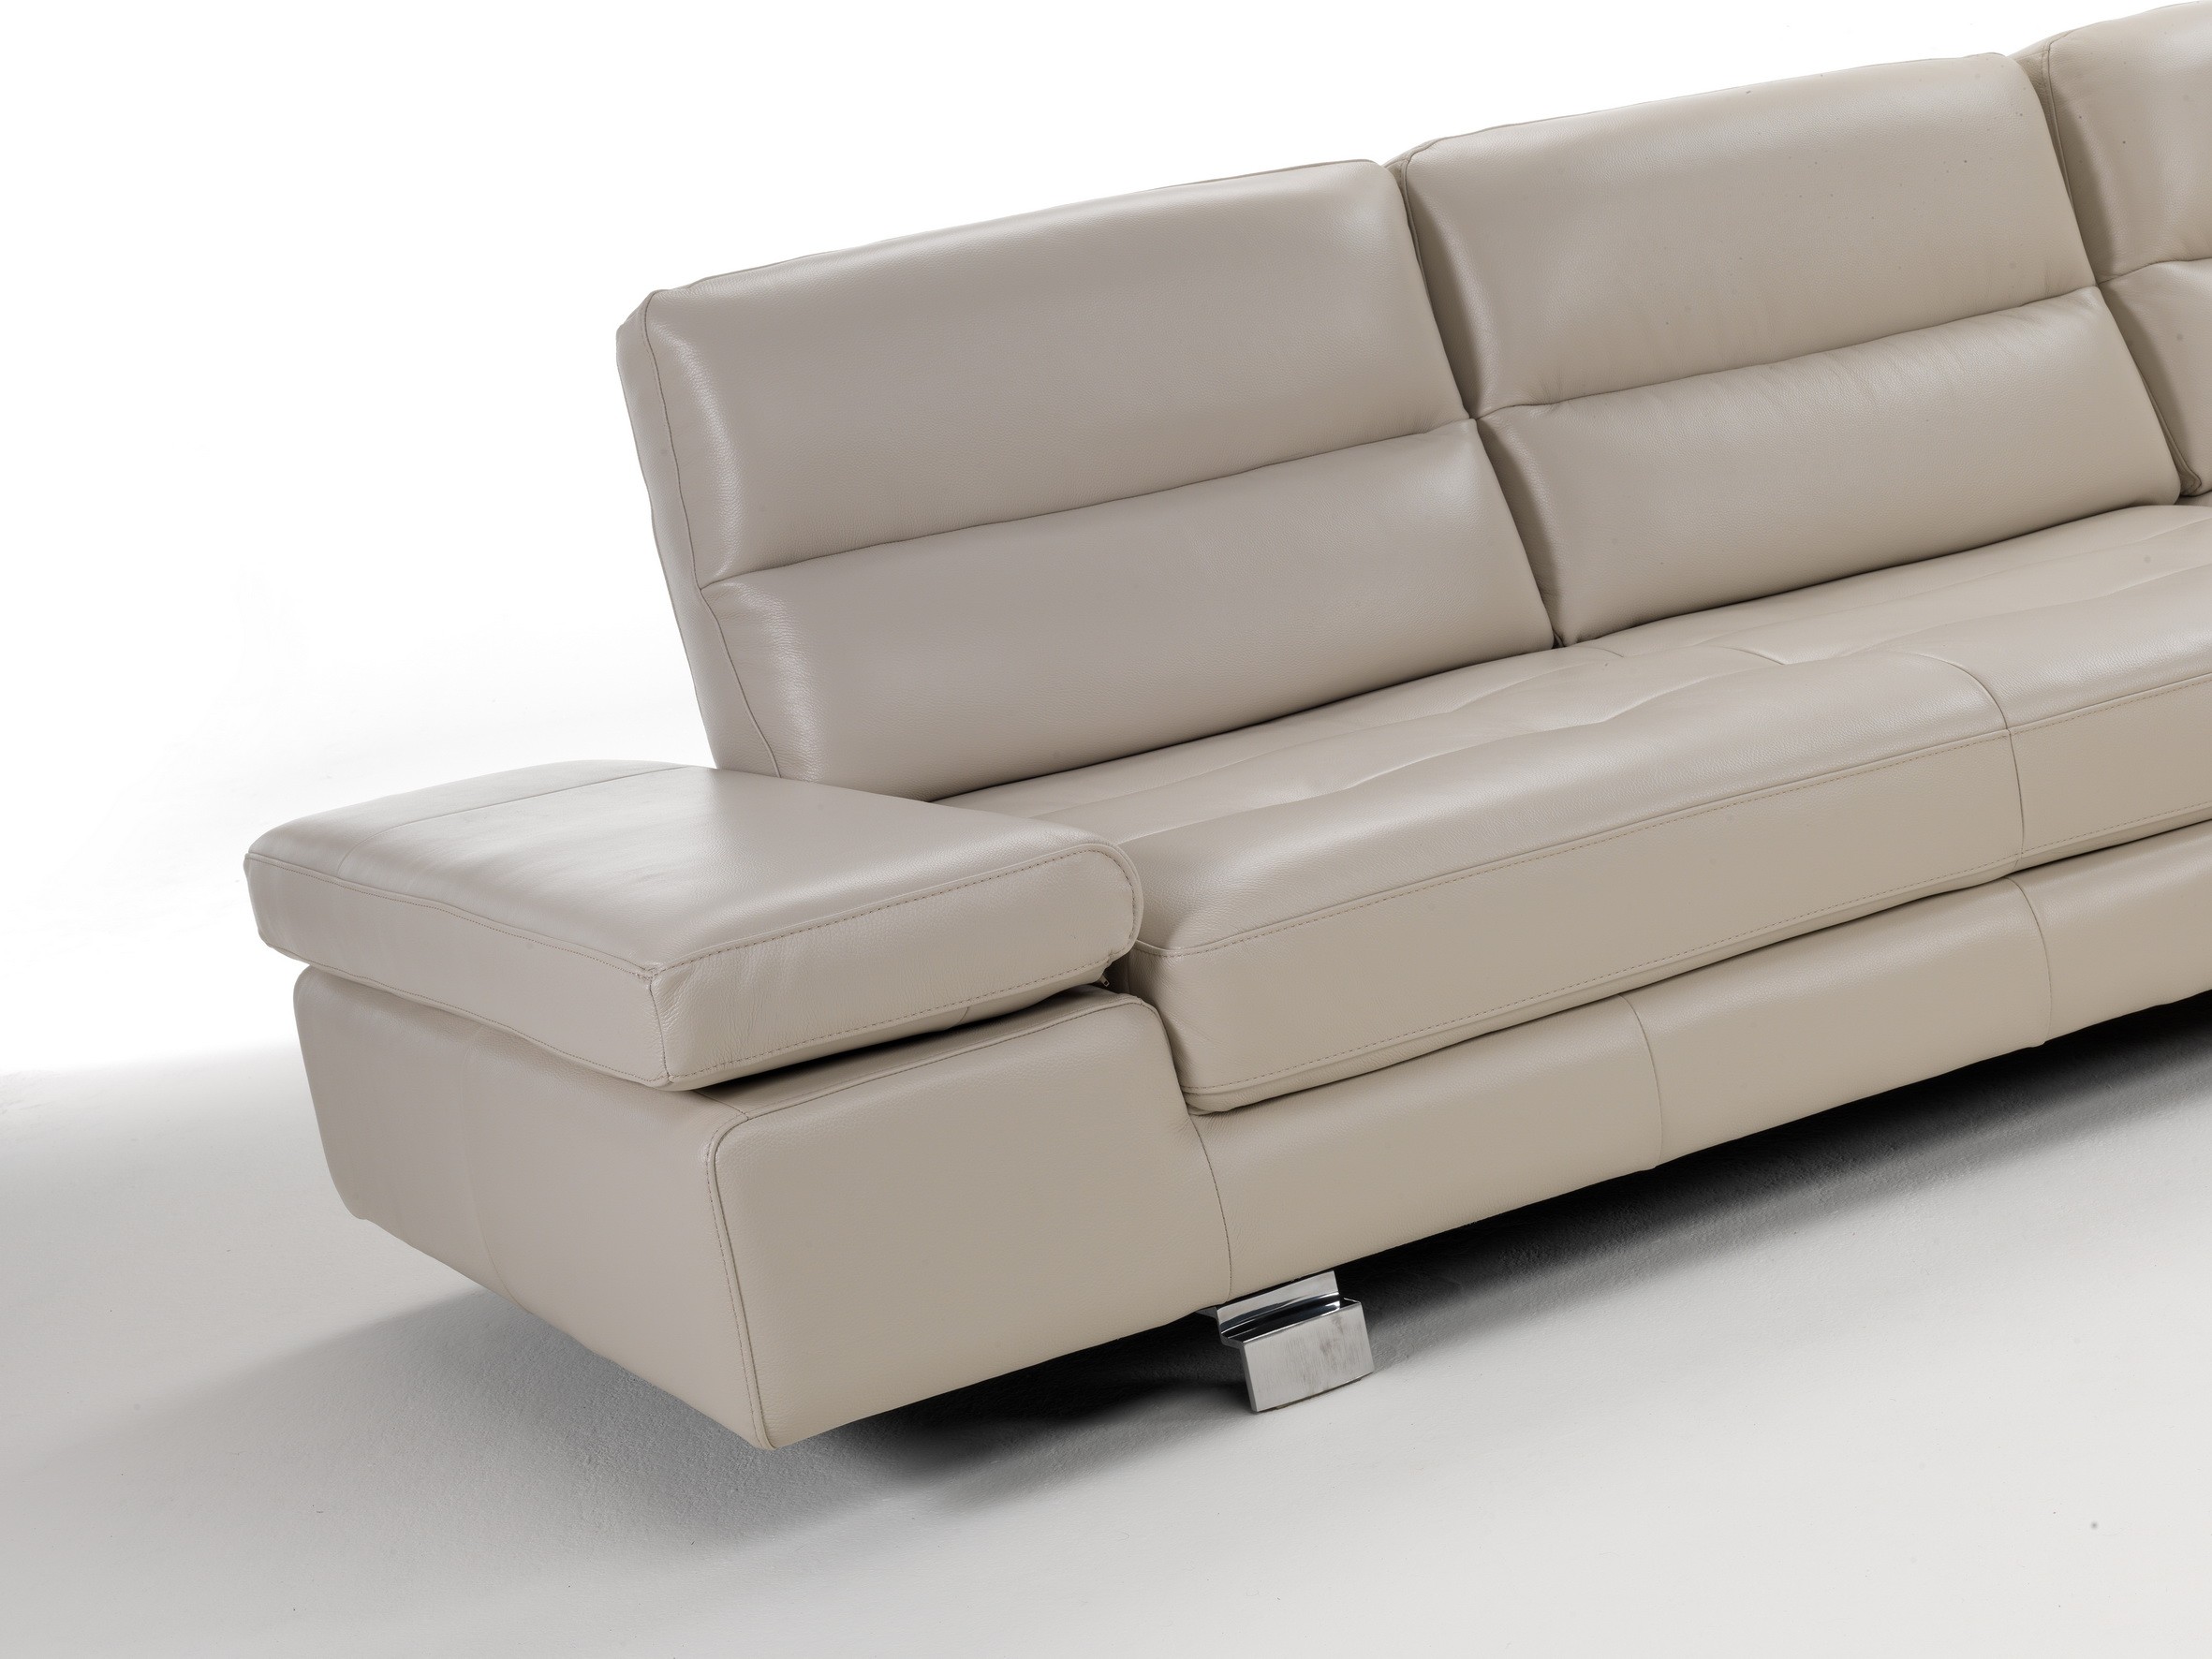 Overnice Tufted Leather Corner Sectional Sofa with Adjustable Backs - Click Image to Close